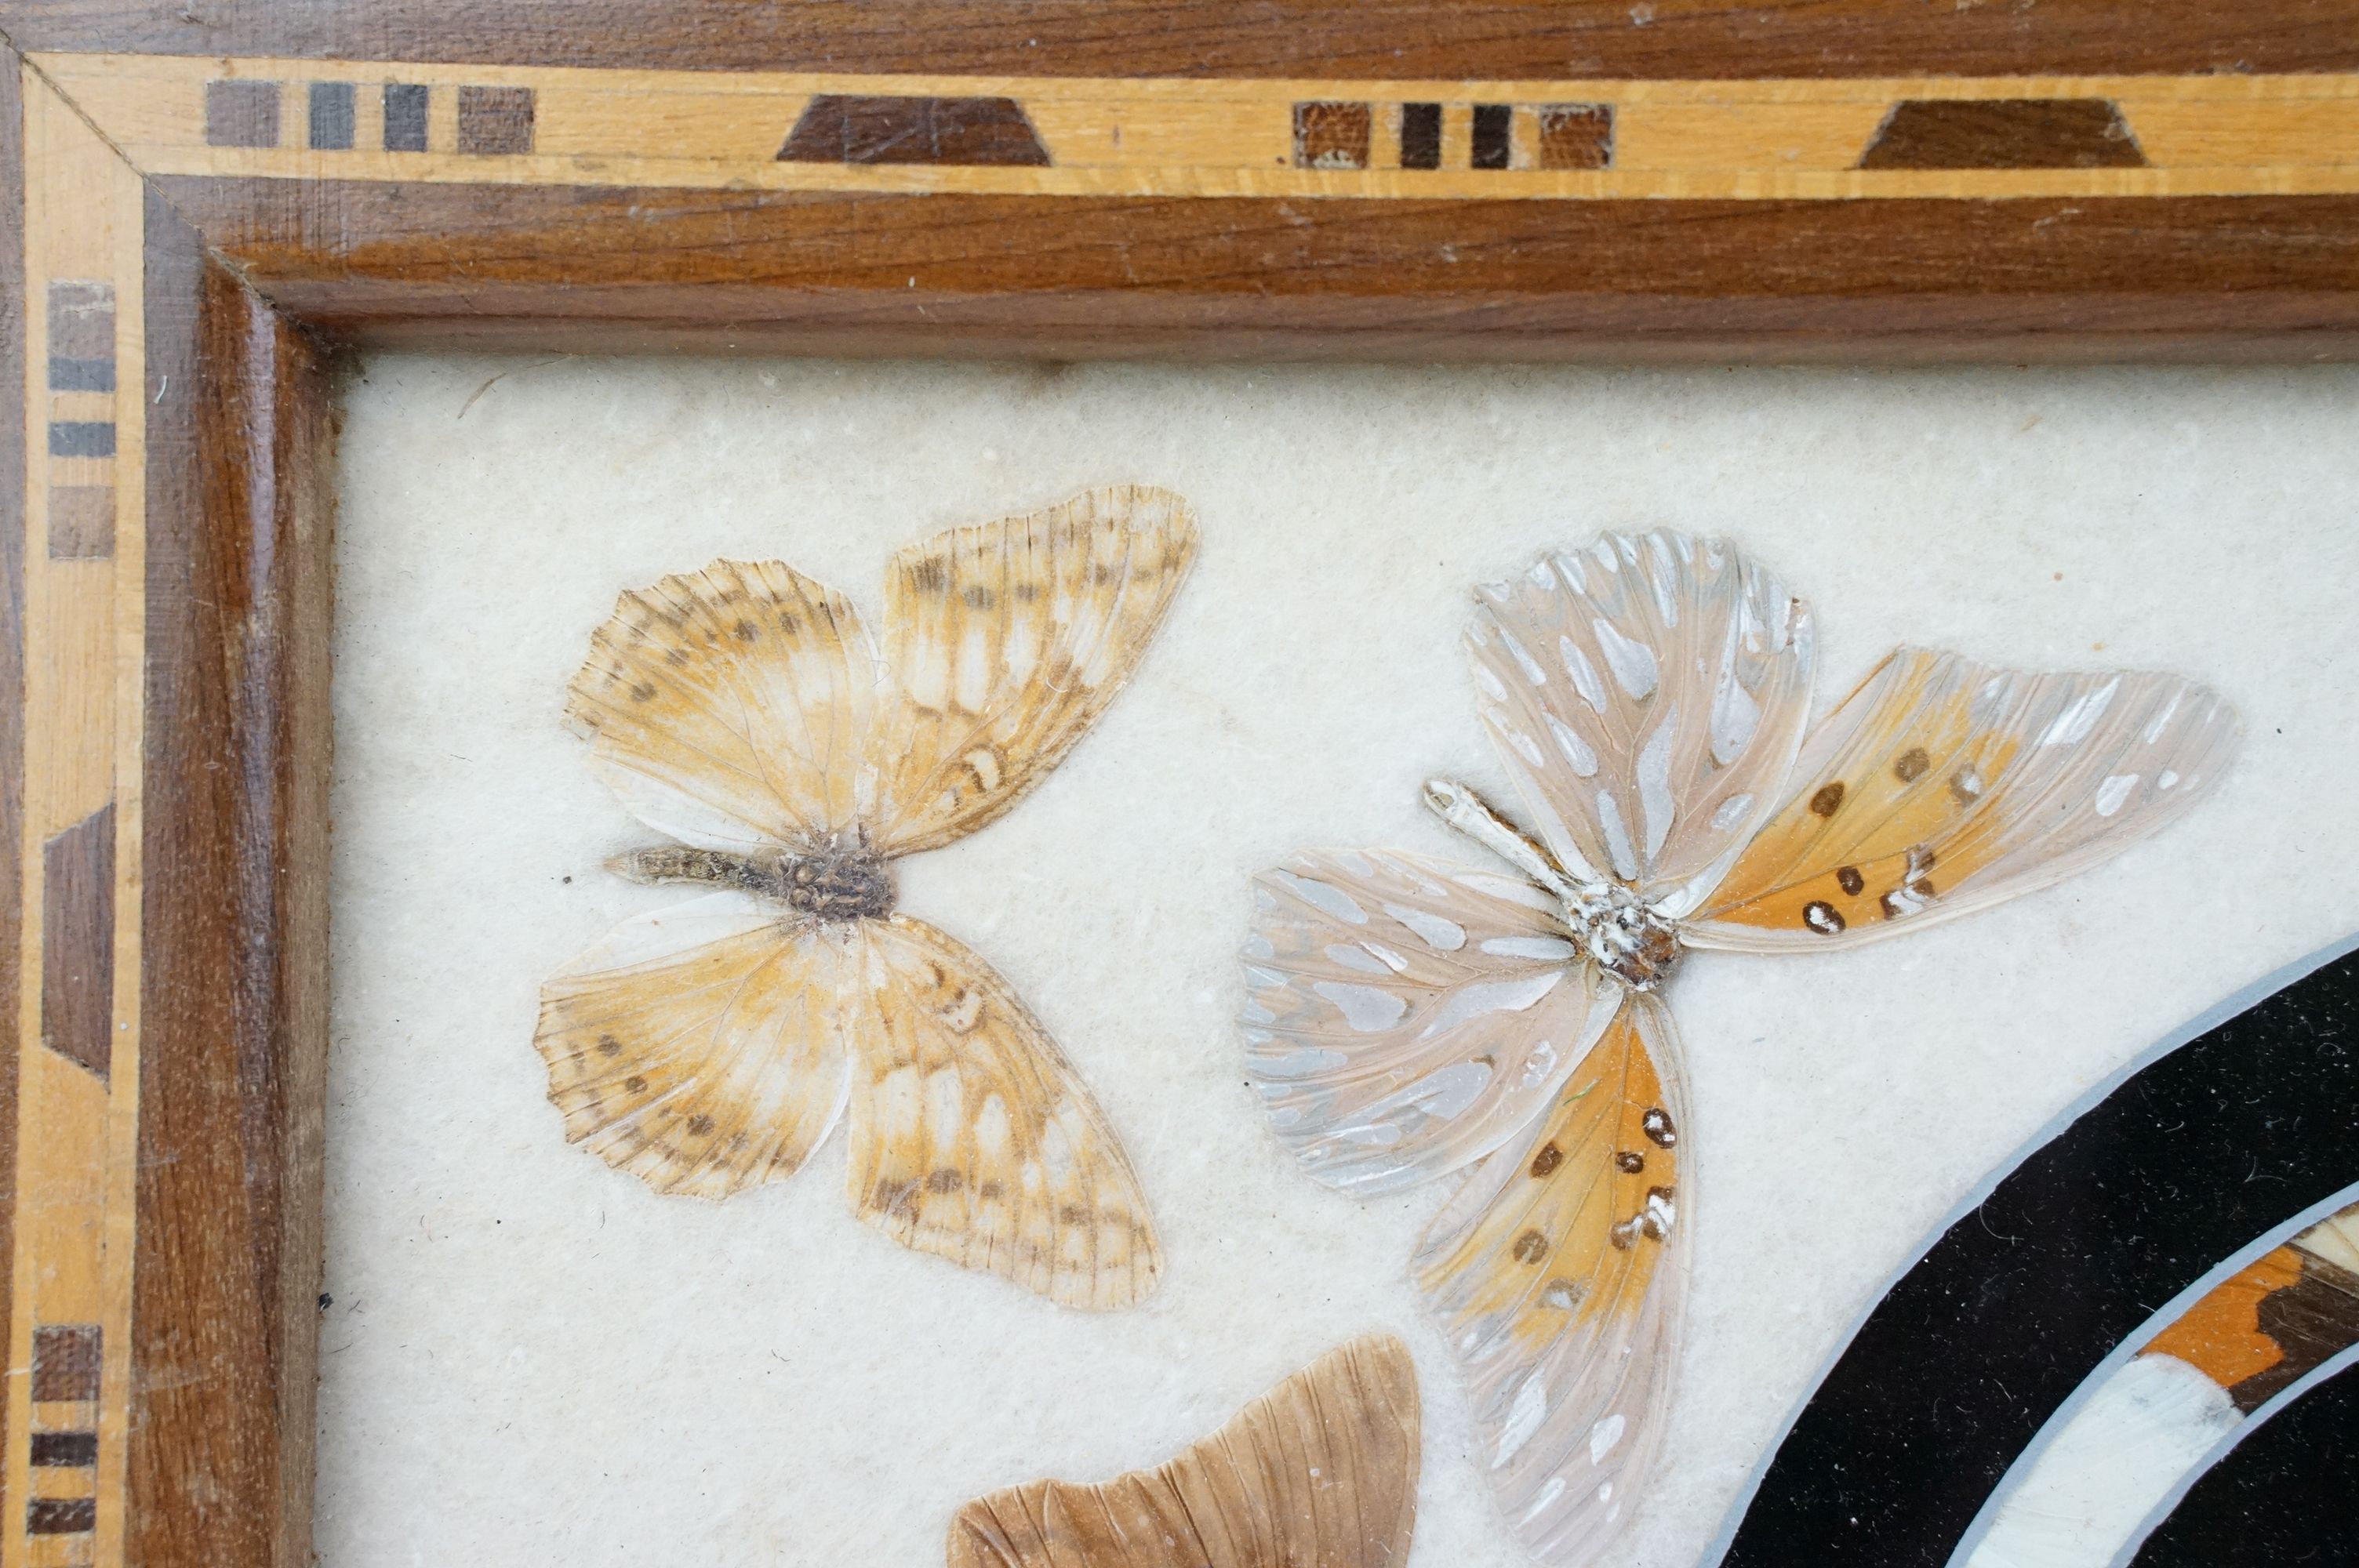 Early 20th century inlaid wooden tray with butterfly specimens and masonic butterfly wing emblem - Image 3 of 11